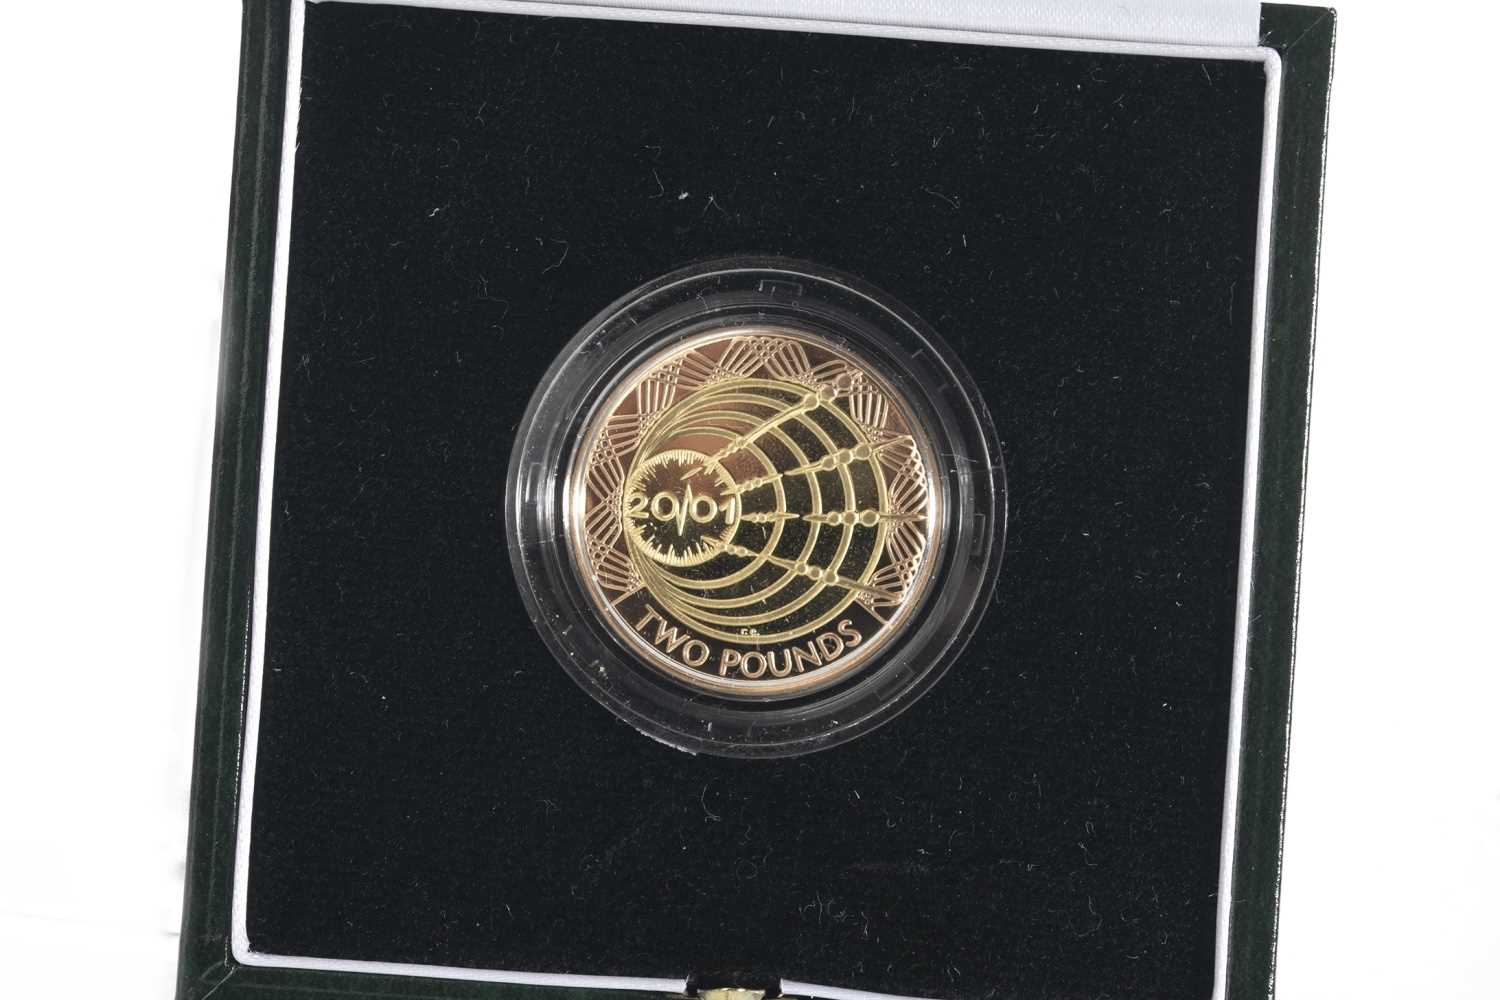 Lot 44 - 2001 GOLD PROOF MARCONI £2 COIN